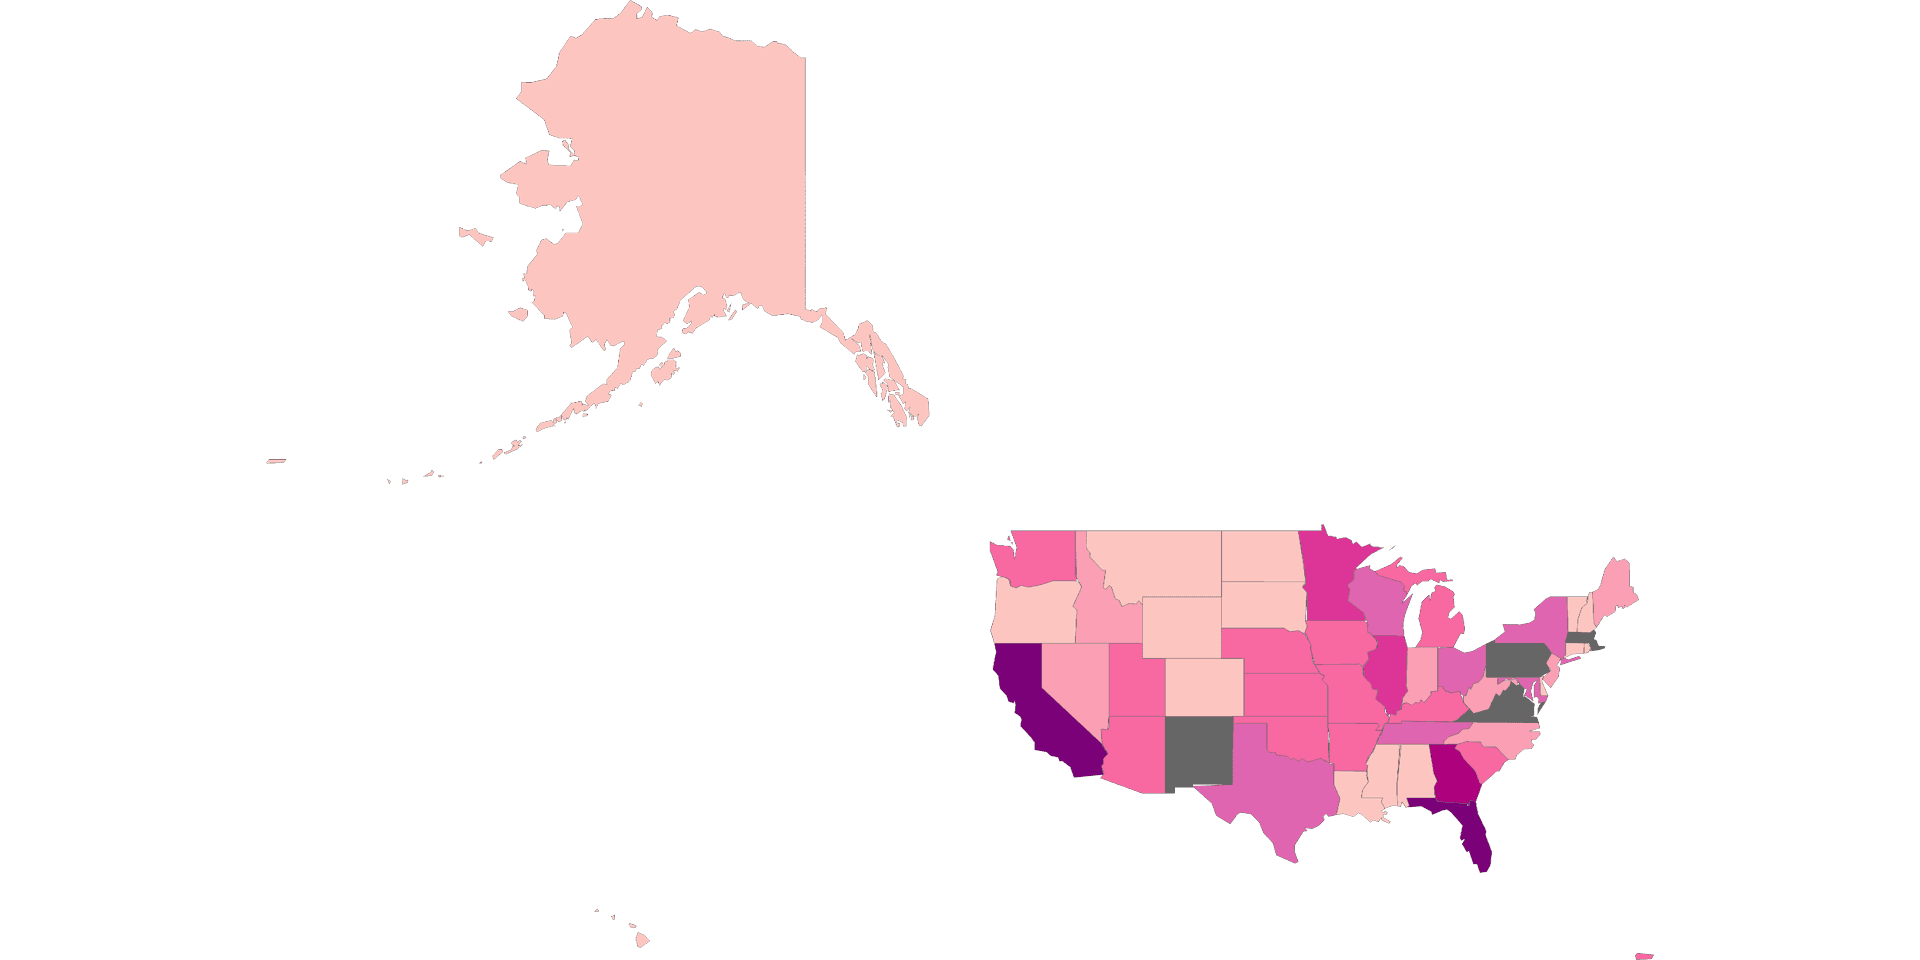 Employment of Chief Executives by State